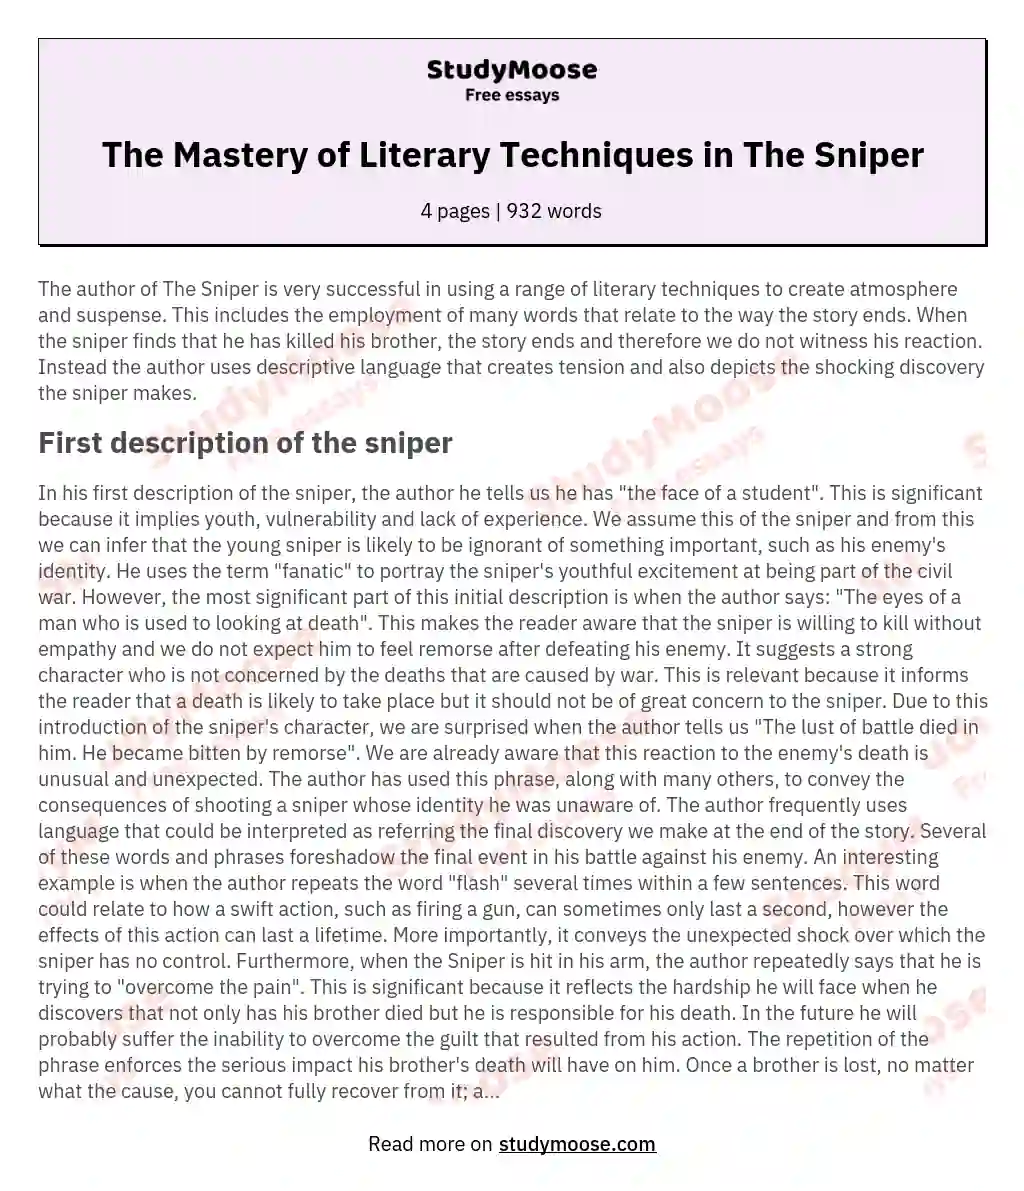 The Mastery of Literary Techniques in The Sniper essay